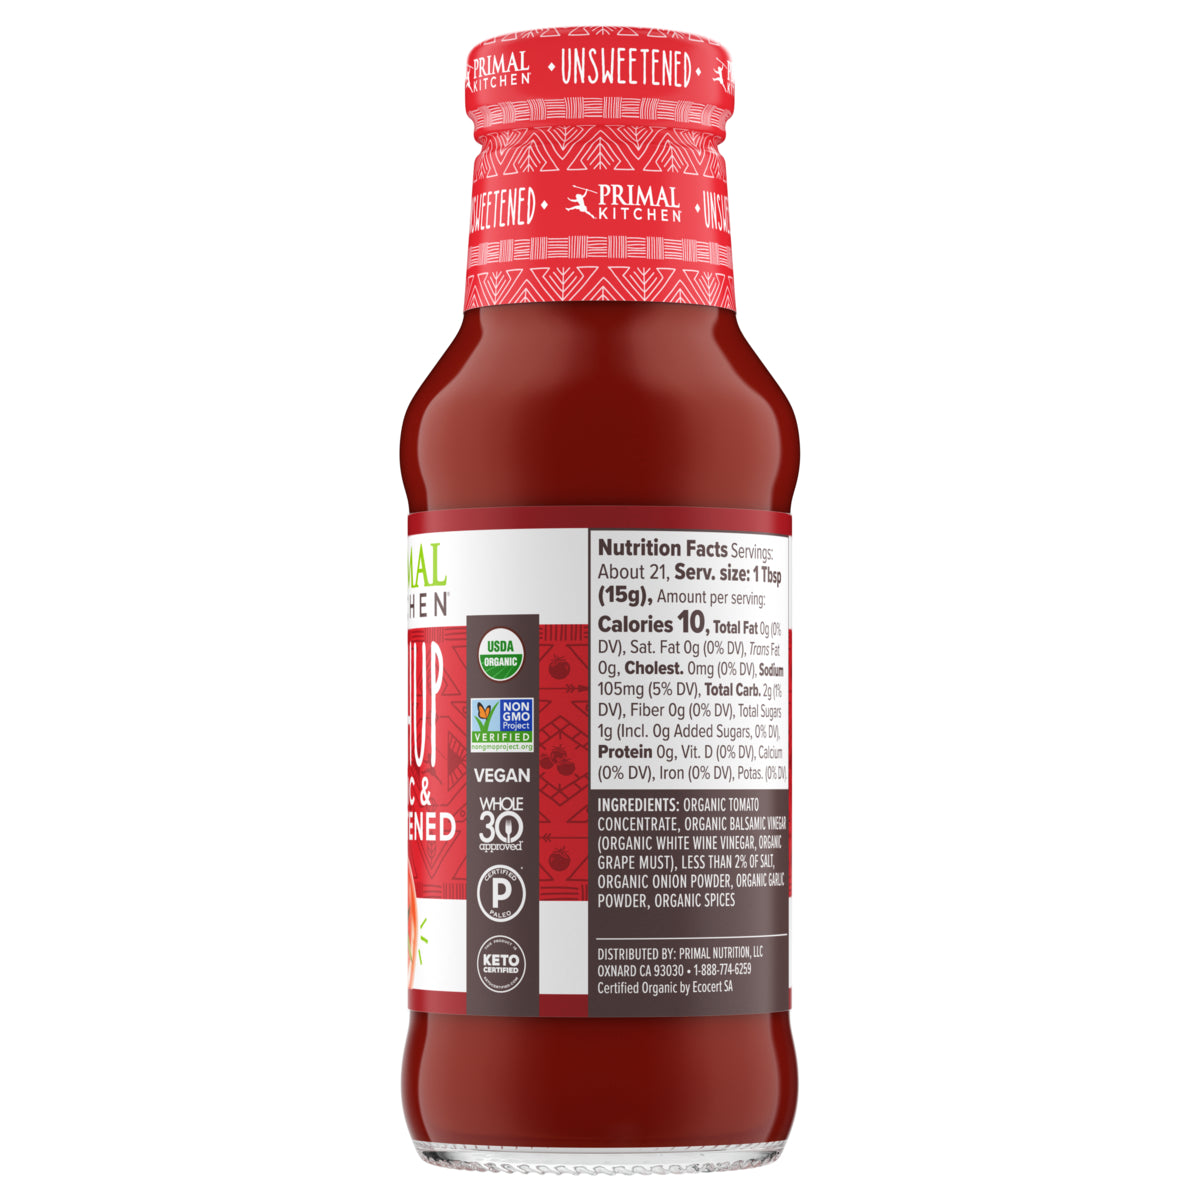 Backside of Primal Kitchen Organic Unsweetened Ketchup bottle showing nutrition facts and ingredients label